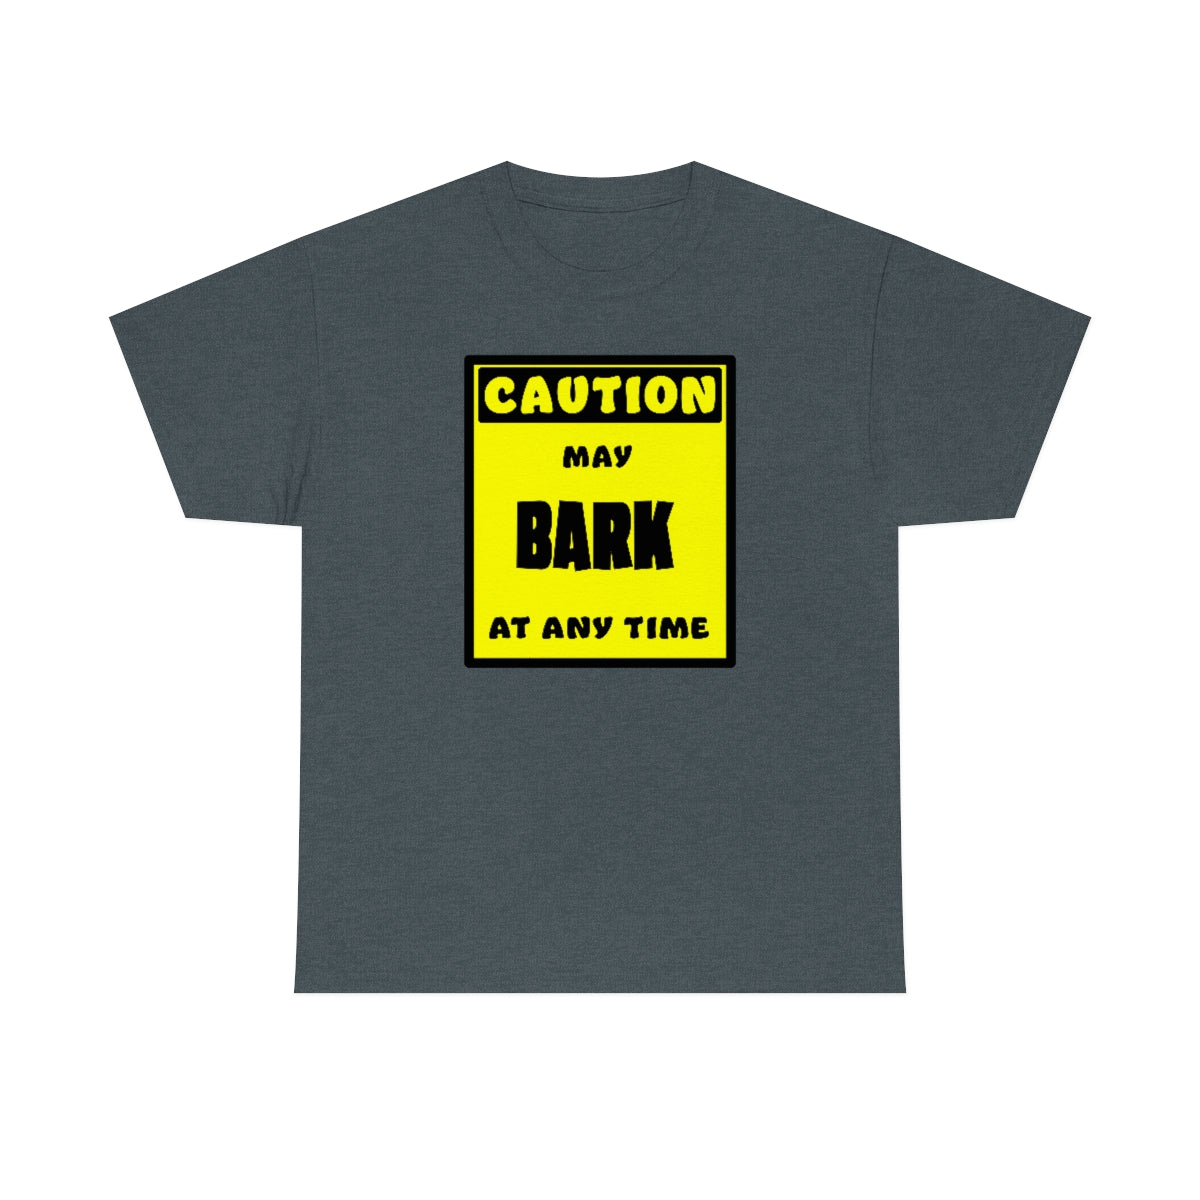 CAUTION! May BARK at any time! - T-Shirt T-Shirt AFLT-Whootorca Dark Heather S 